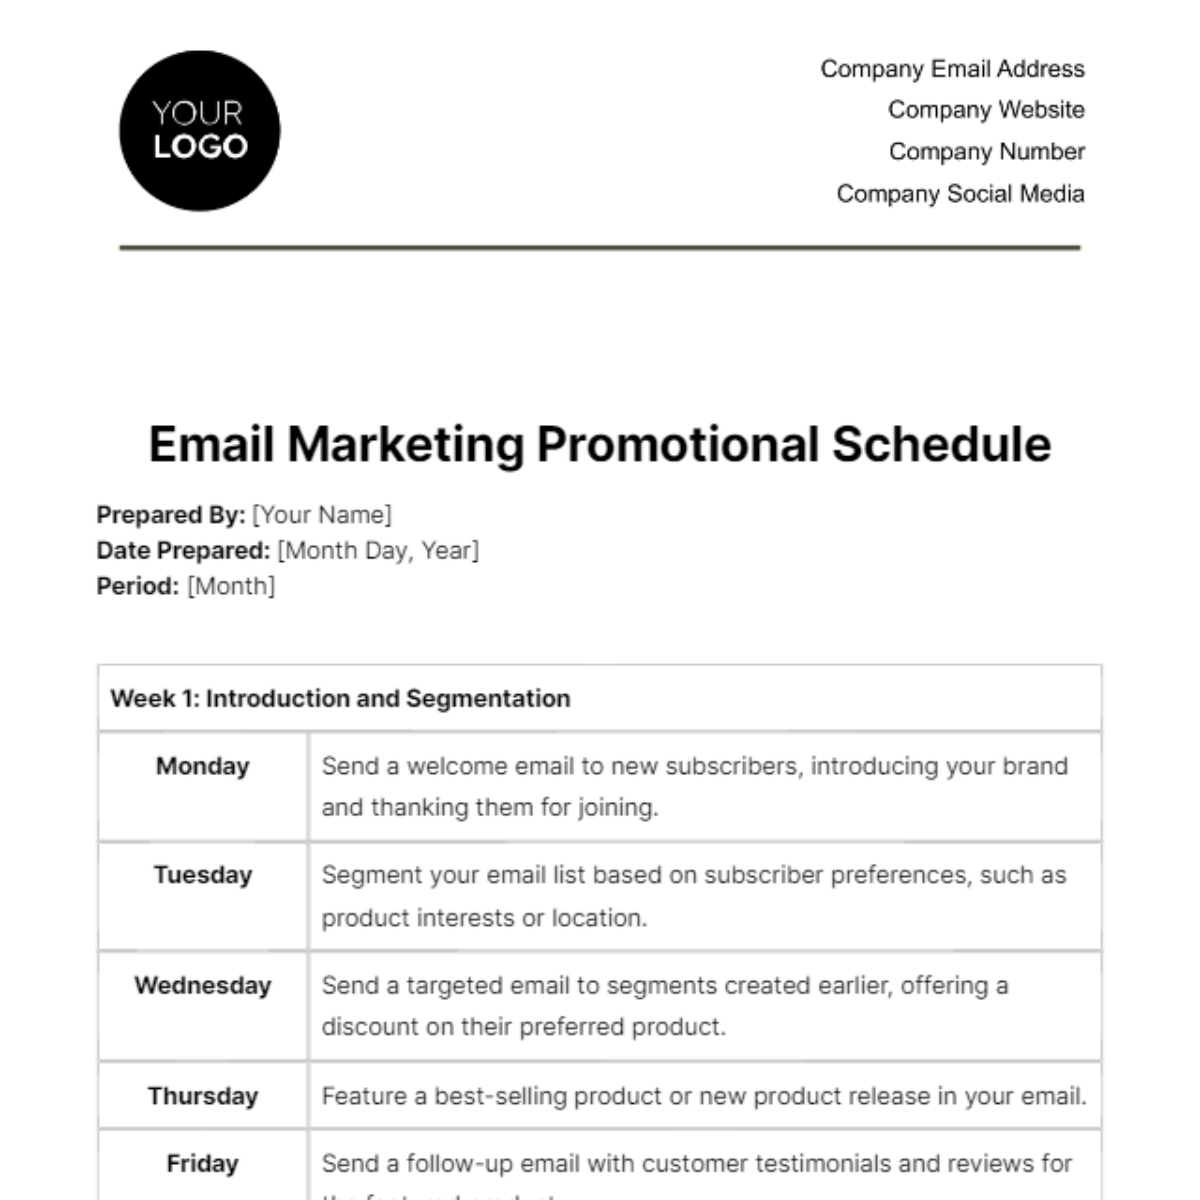 Free Email Marketing Promotional Schedule Template